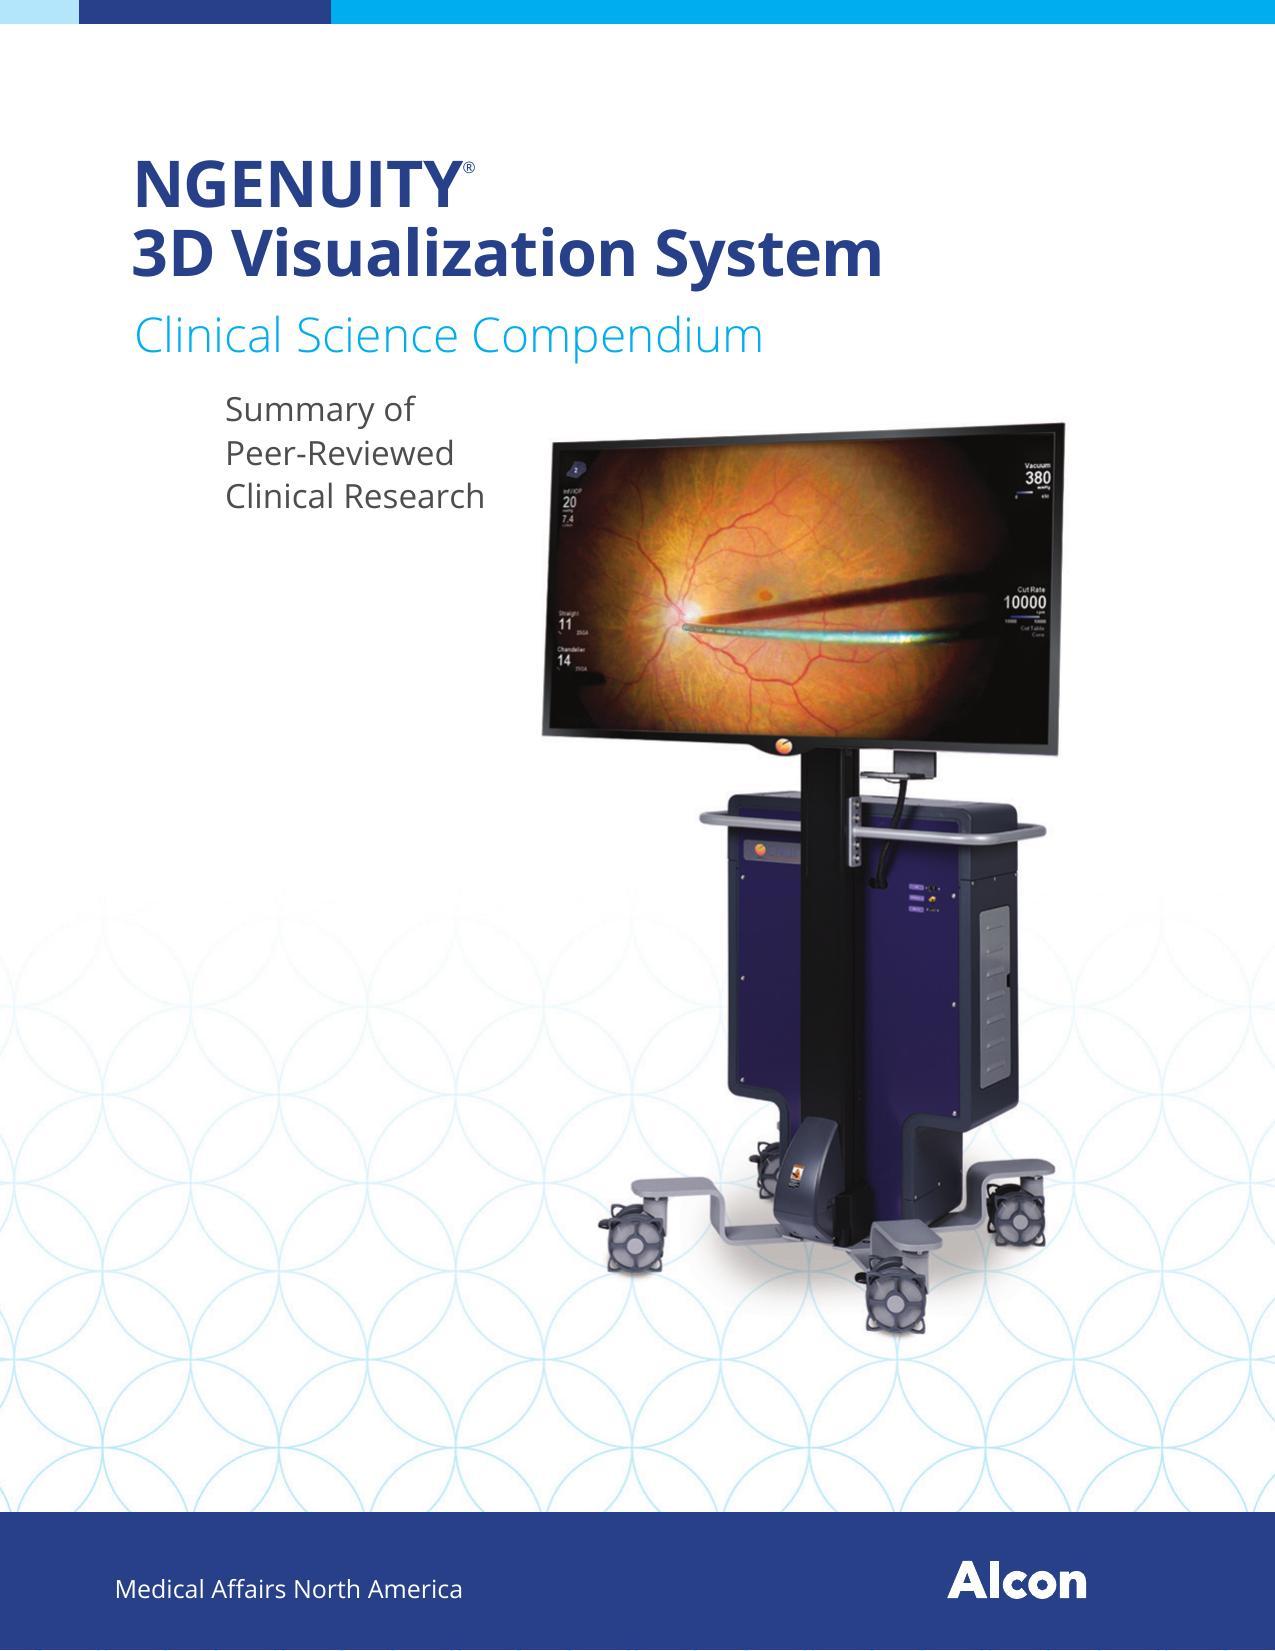 ngenuity-3d-visualization-system-clinical-science-compendium-summary-of-peer-reviewed-clinical-research.pdf